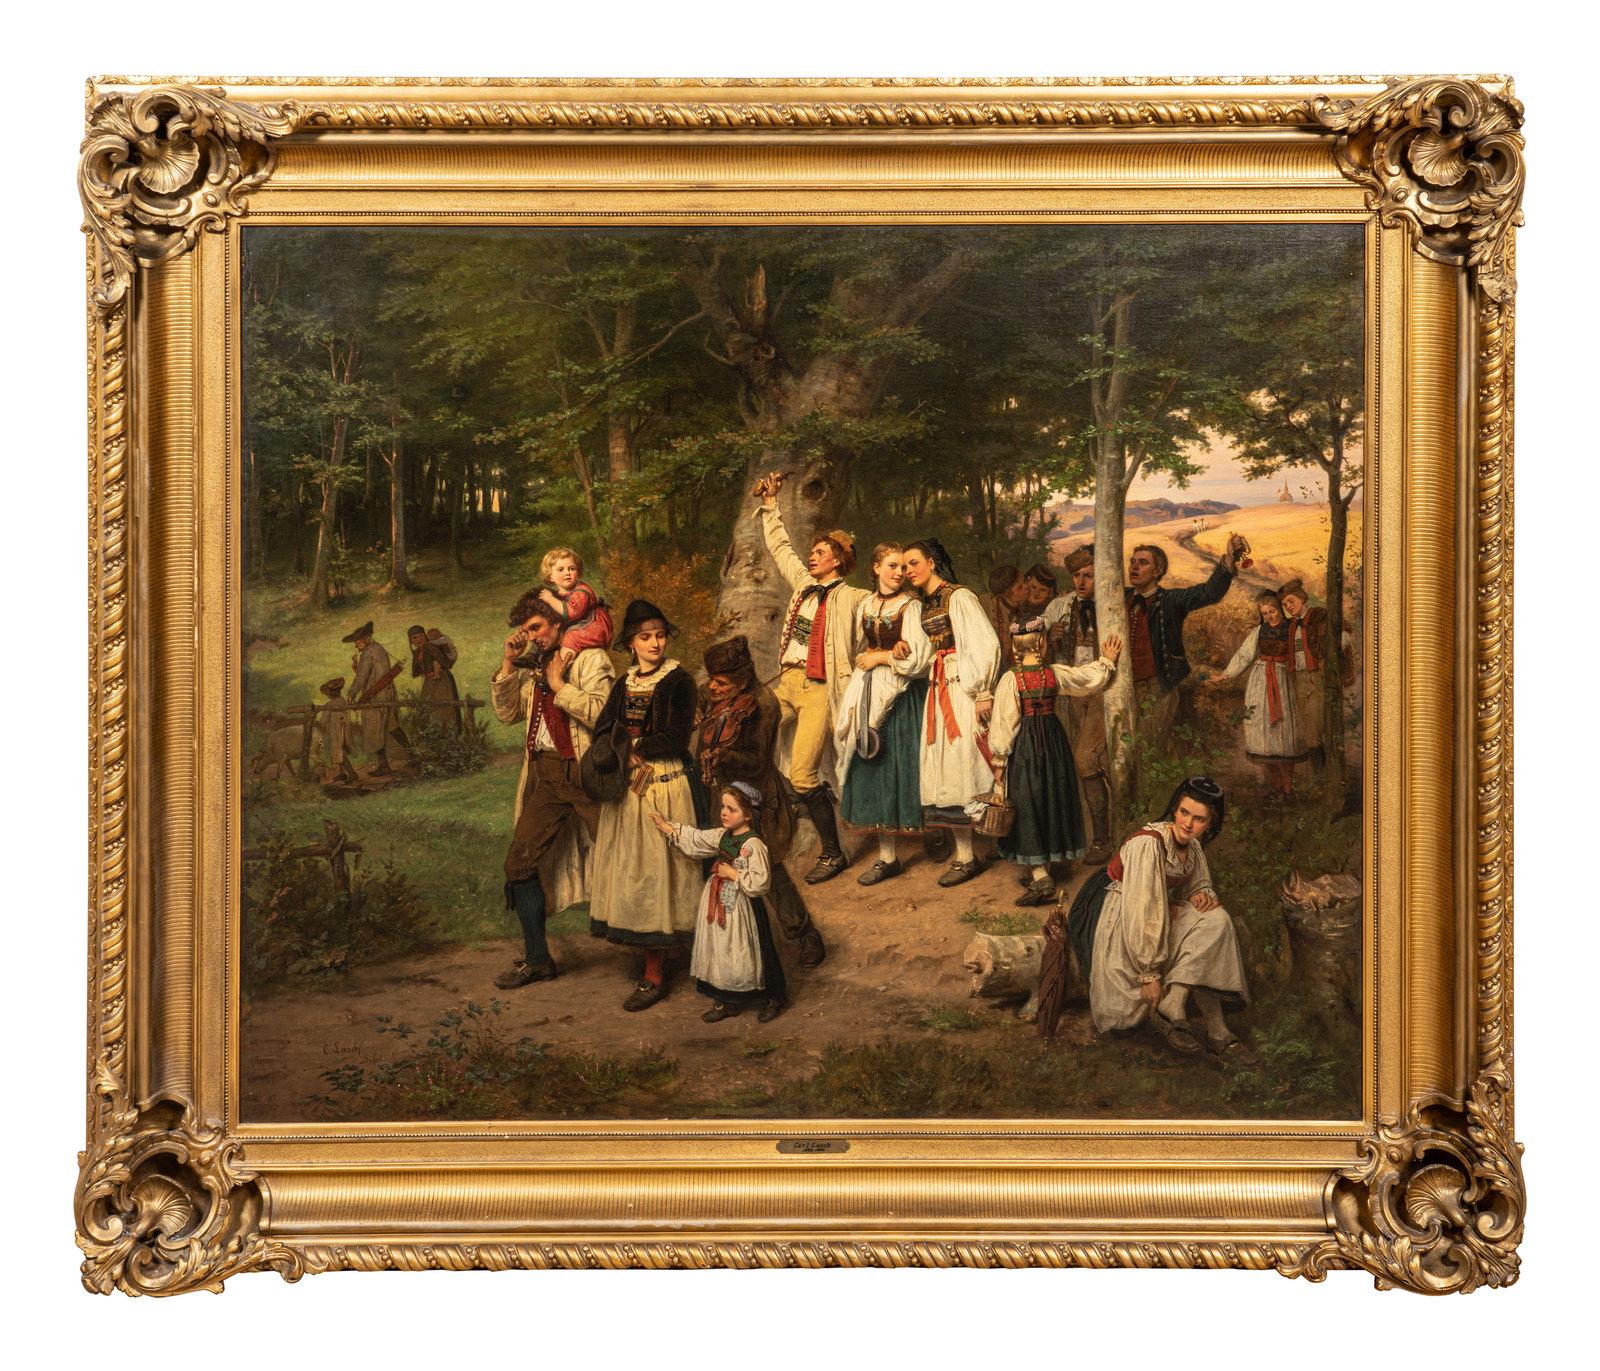 Carl Lasch (1822-1888 German) "The Walk Back Home" A Monumental Exhibition Painting, 

Oil on canvas laid to masonite in original gilt-wood frame.

This monument painting is the artists largest and most important work known to date. It depicts a